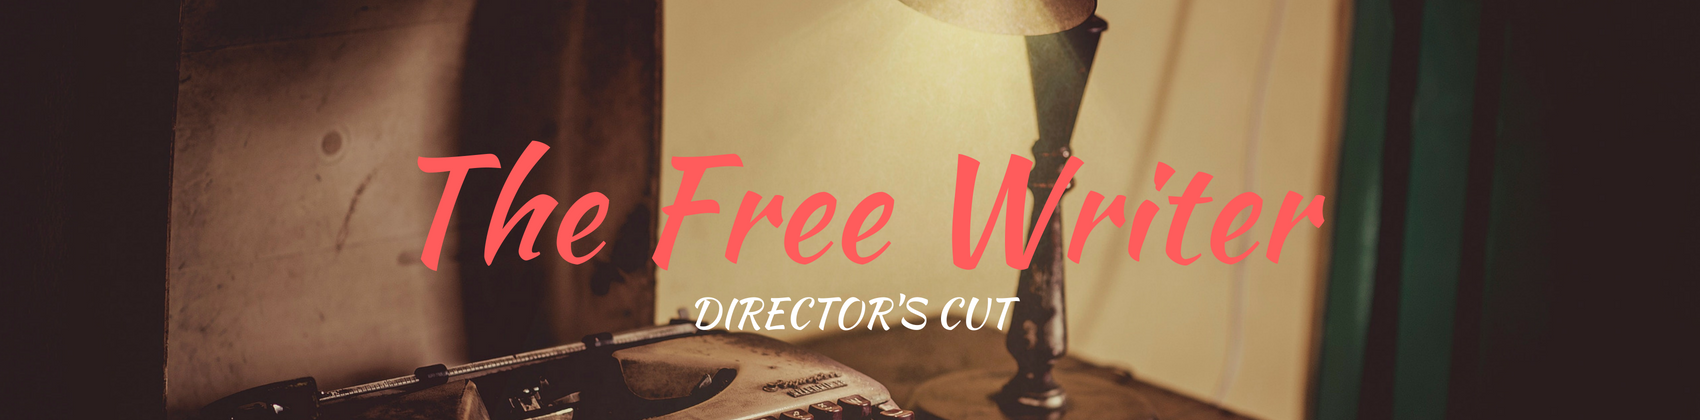 The Free Writer: Director’s cut